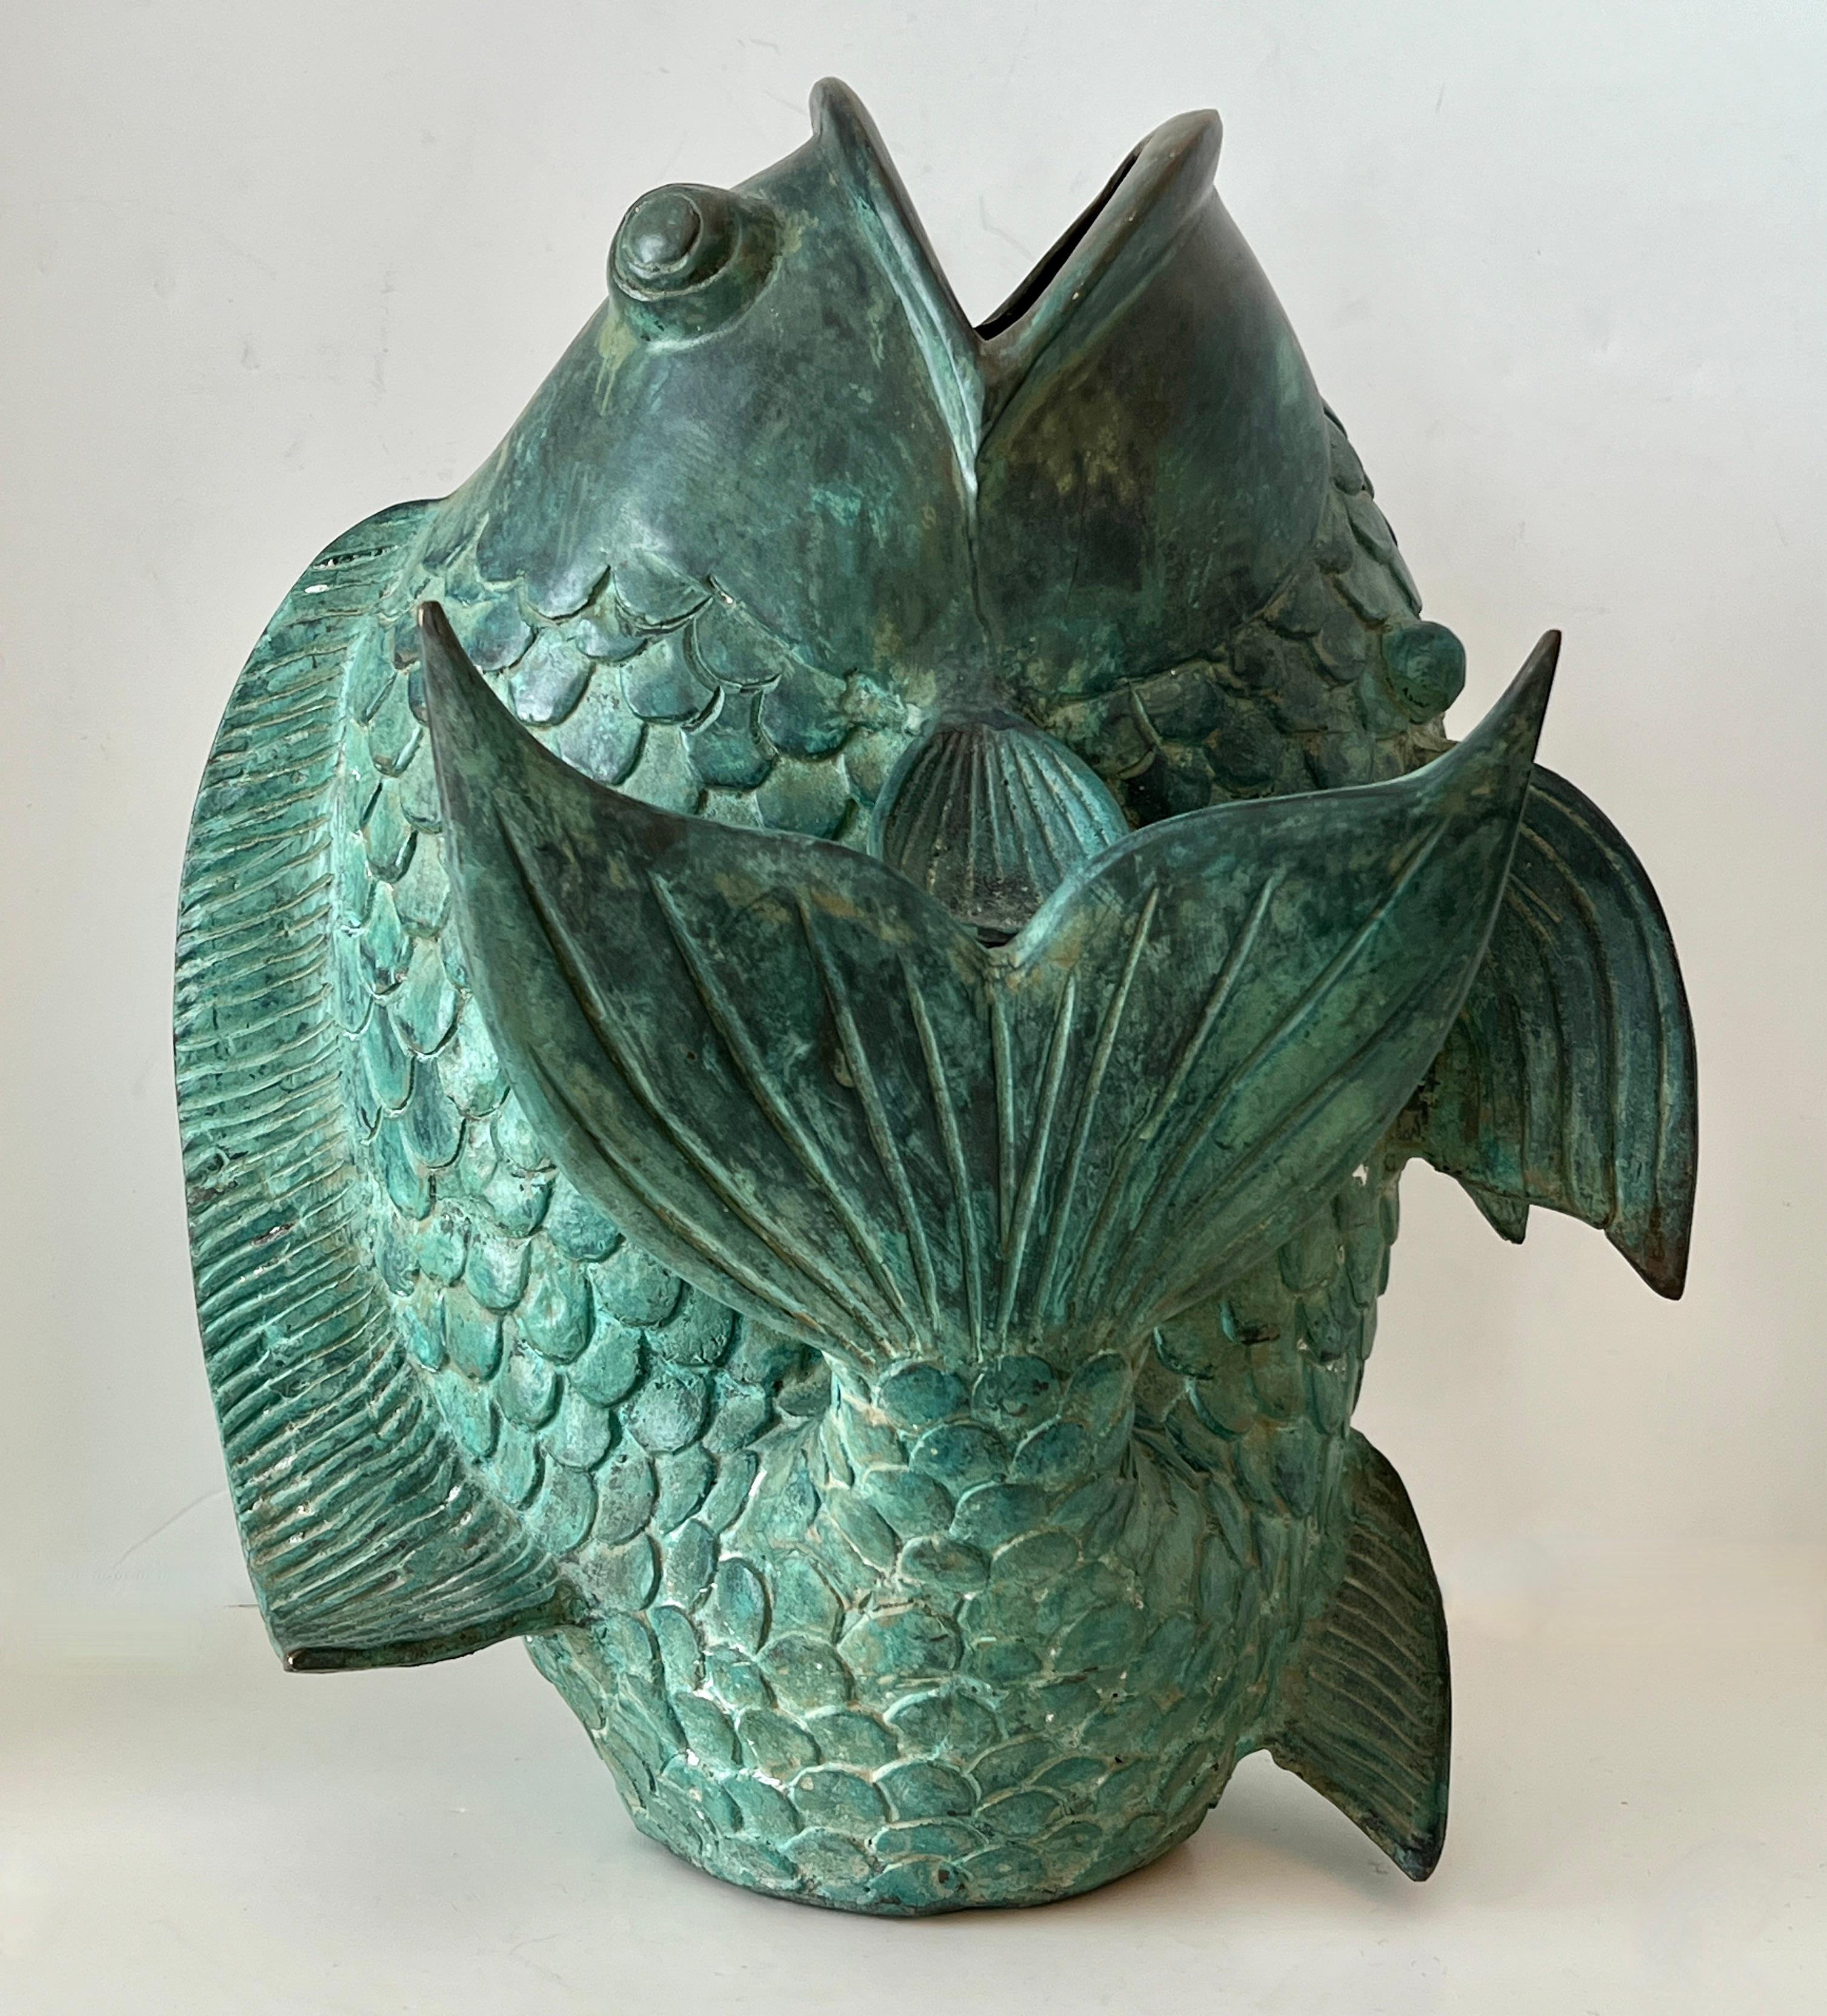 Bronze Koi Fish Sculpture Vase or Fountain In Good Condition For Sale In Los Angeles, CA